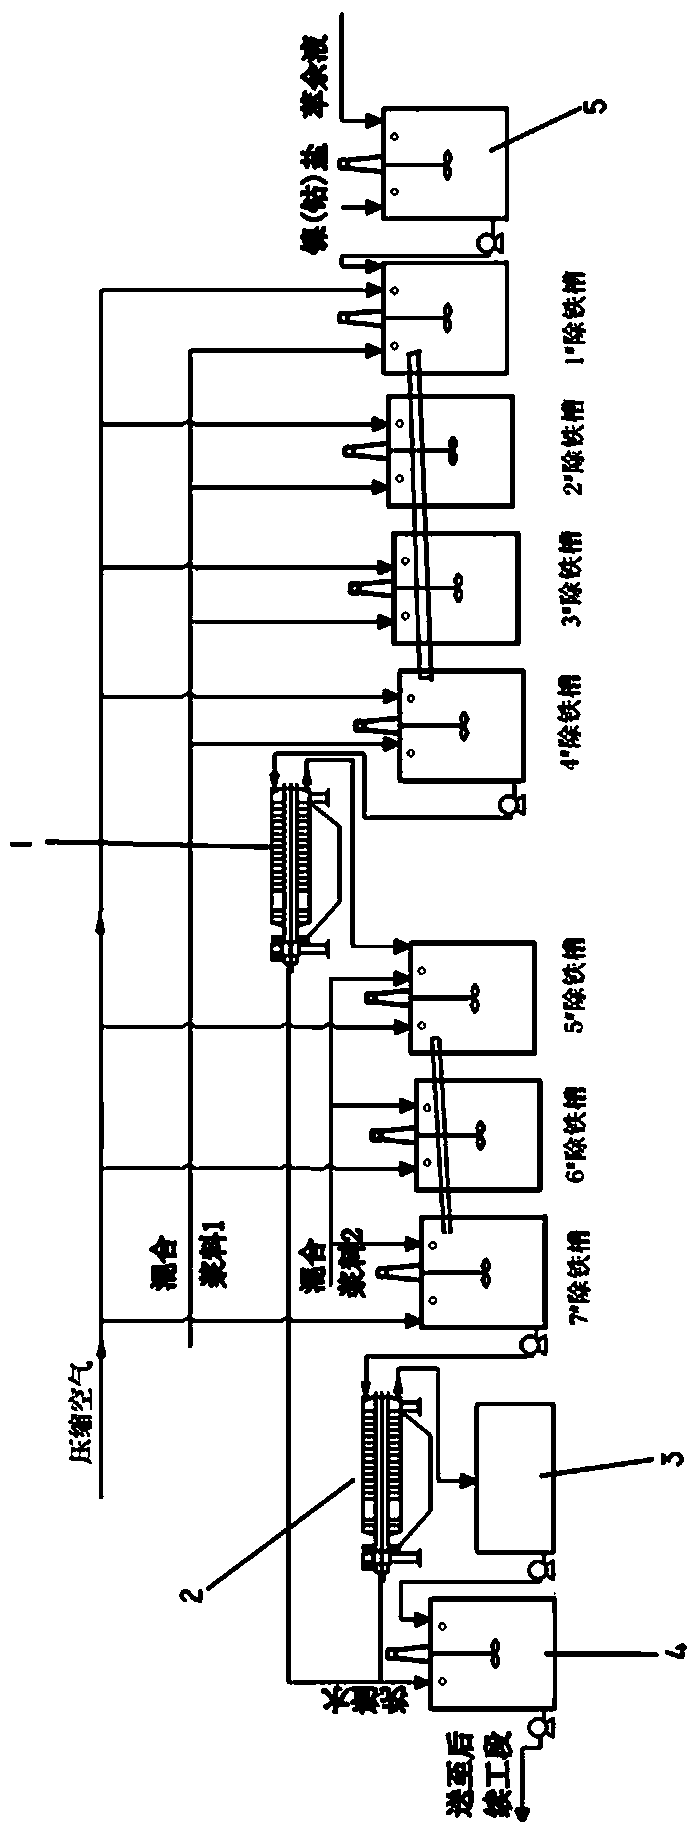 Iron removing device and method for nickel-cobalt raffinate